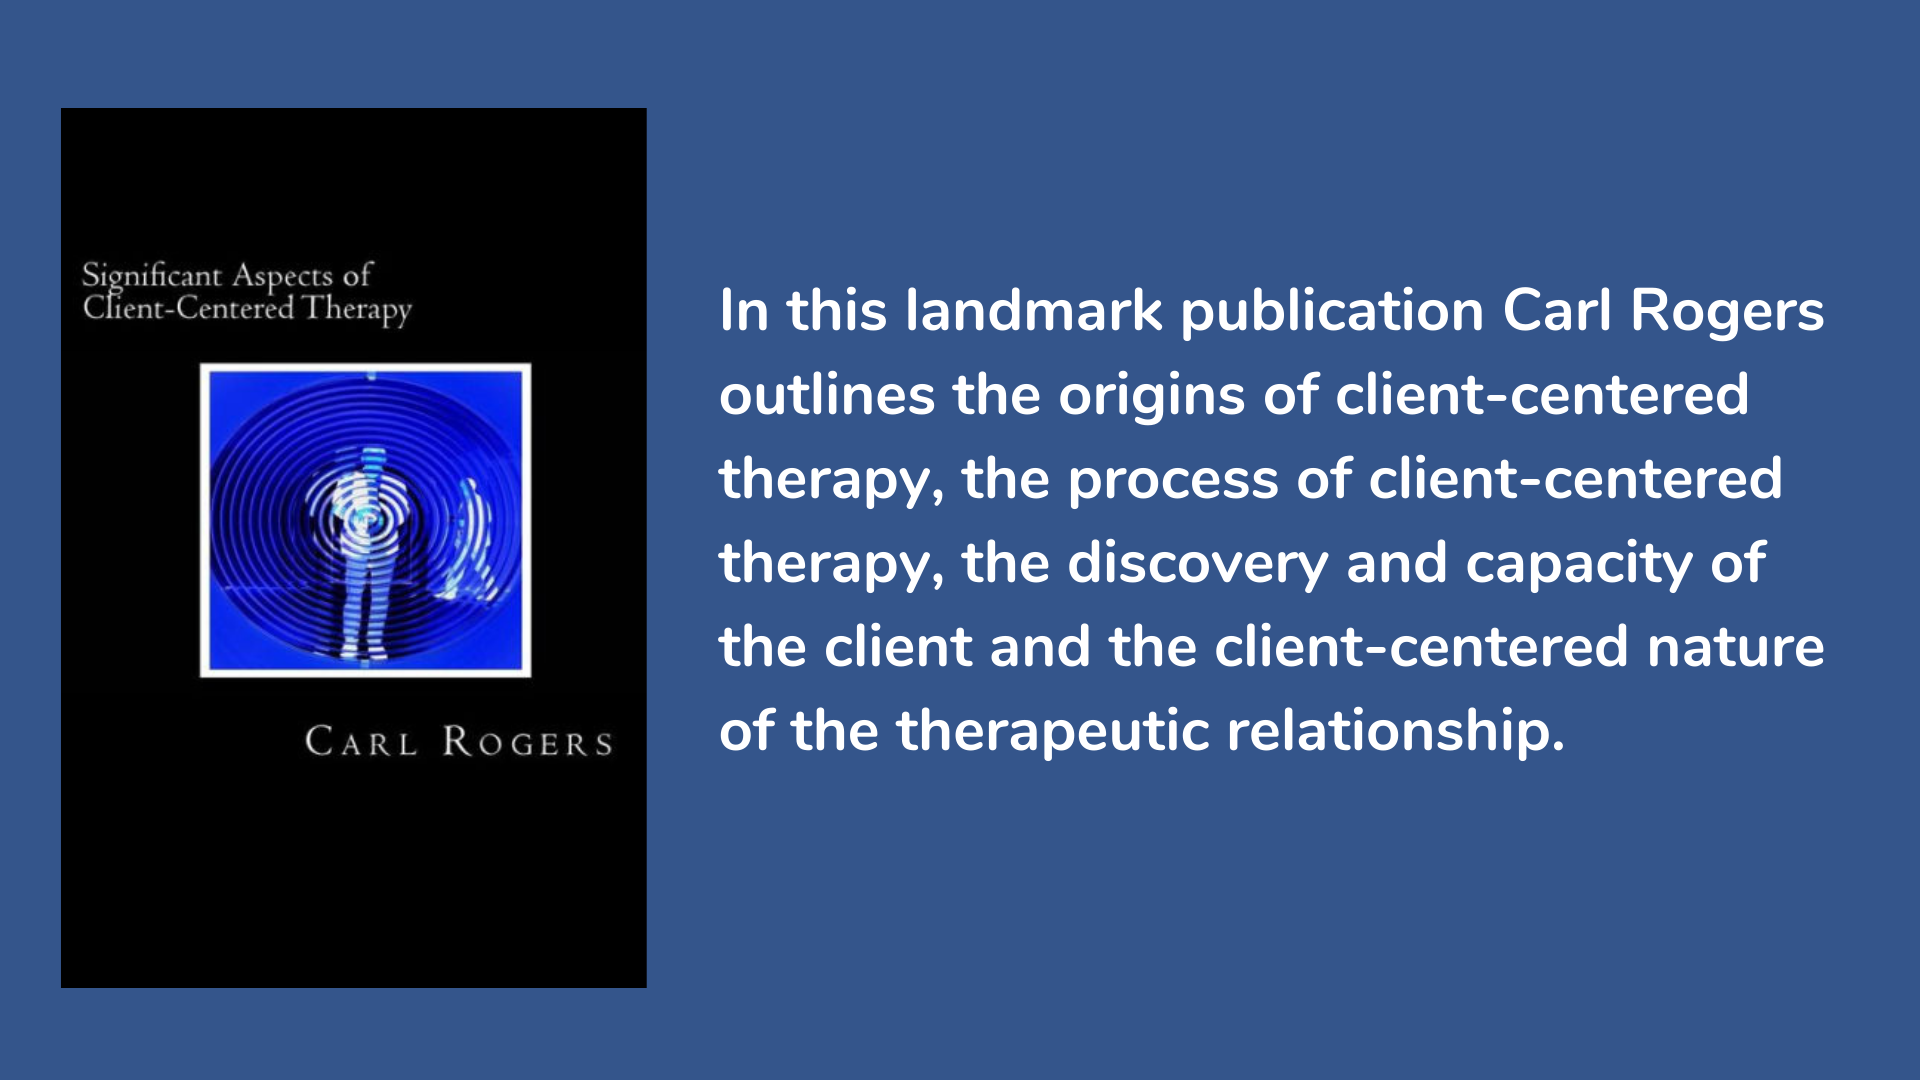 Significant Aspects of Client-Centered Therapy by Carl Rogers